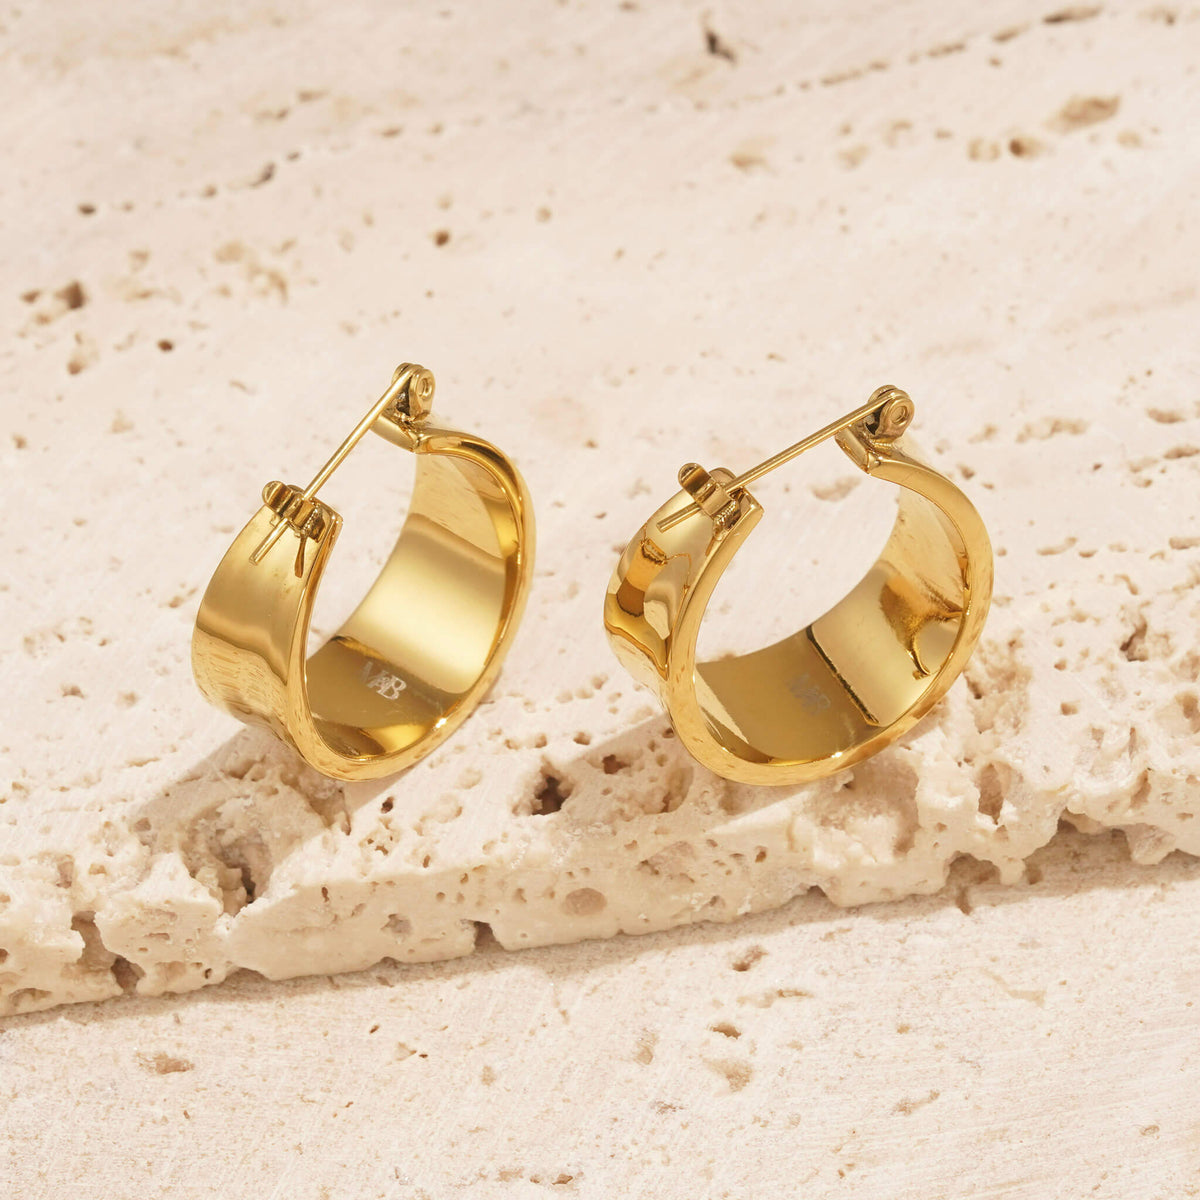 Accessorize with elegance: These stylish large chunky gold hoop earrings add a touch of glamour to any look. Crafted for comfort, they are lightweight and tarnish-resistant, ensuring lasting beauty and effortless wear. Elevate your style with these versatile statement earrings.